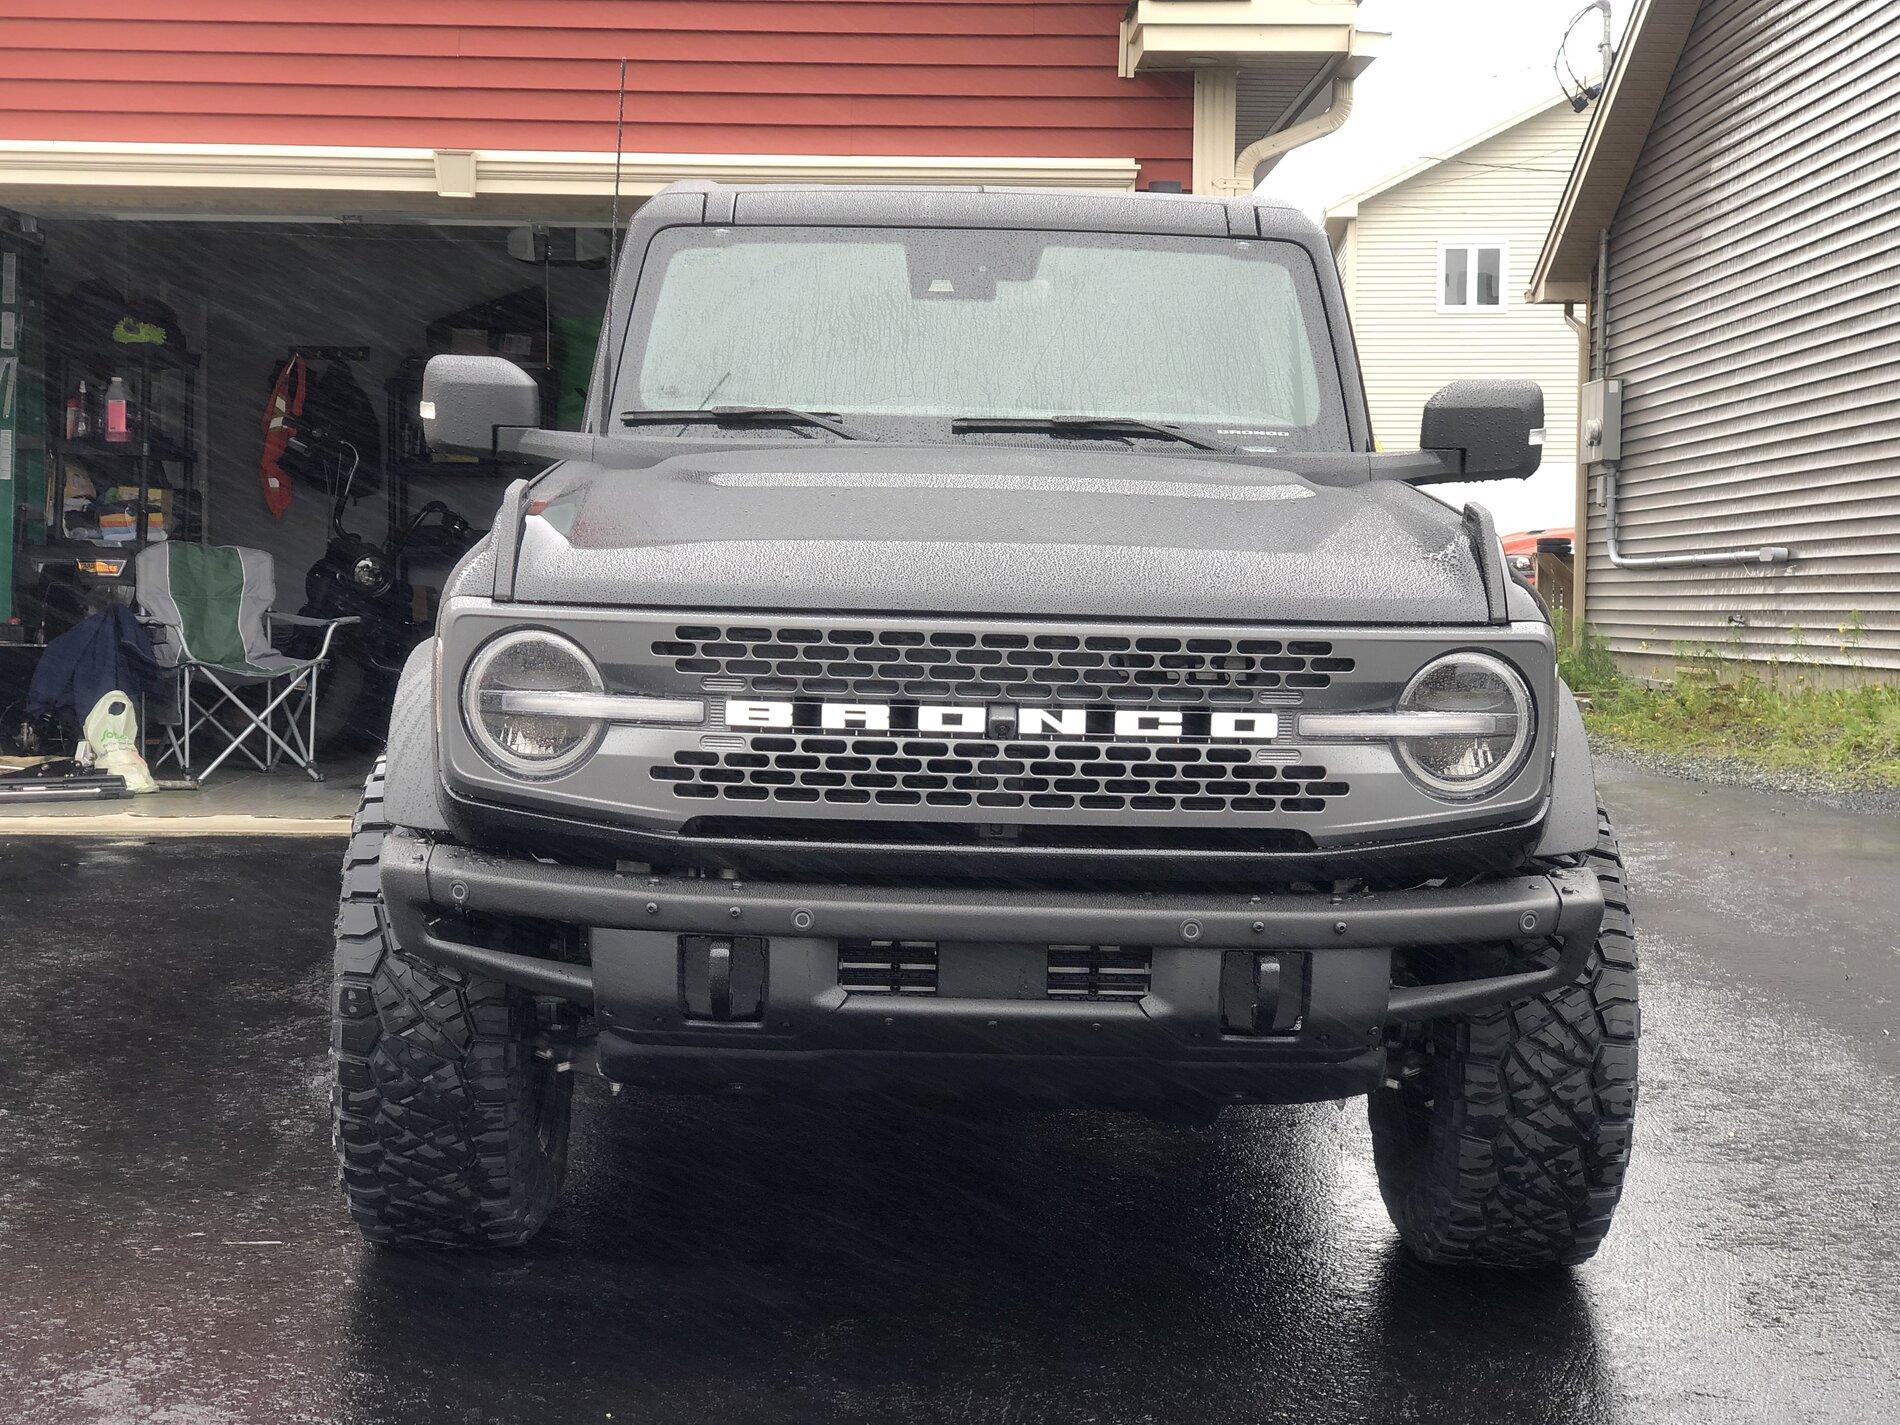 Ford Bronco New pics of my 2021 Bronco Badlands with 35’s!! [Videos Added] 59DB1100-1E48-406E-AA36-805634D753A7